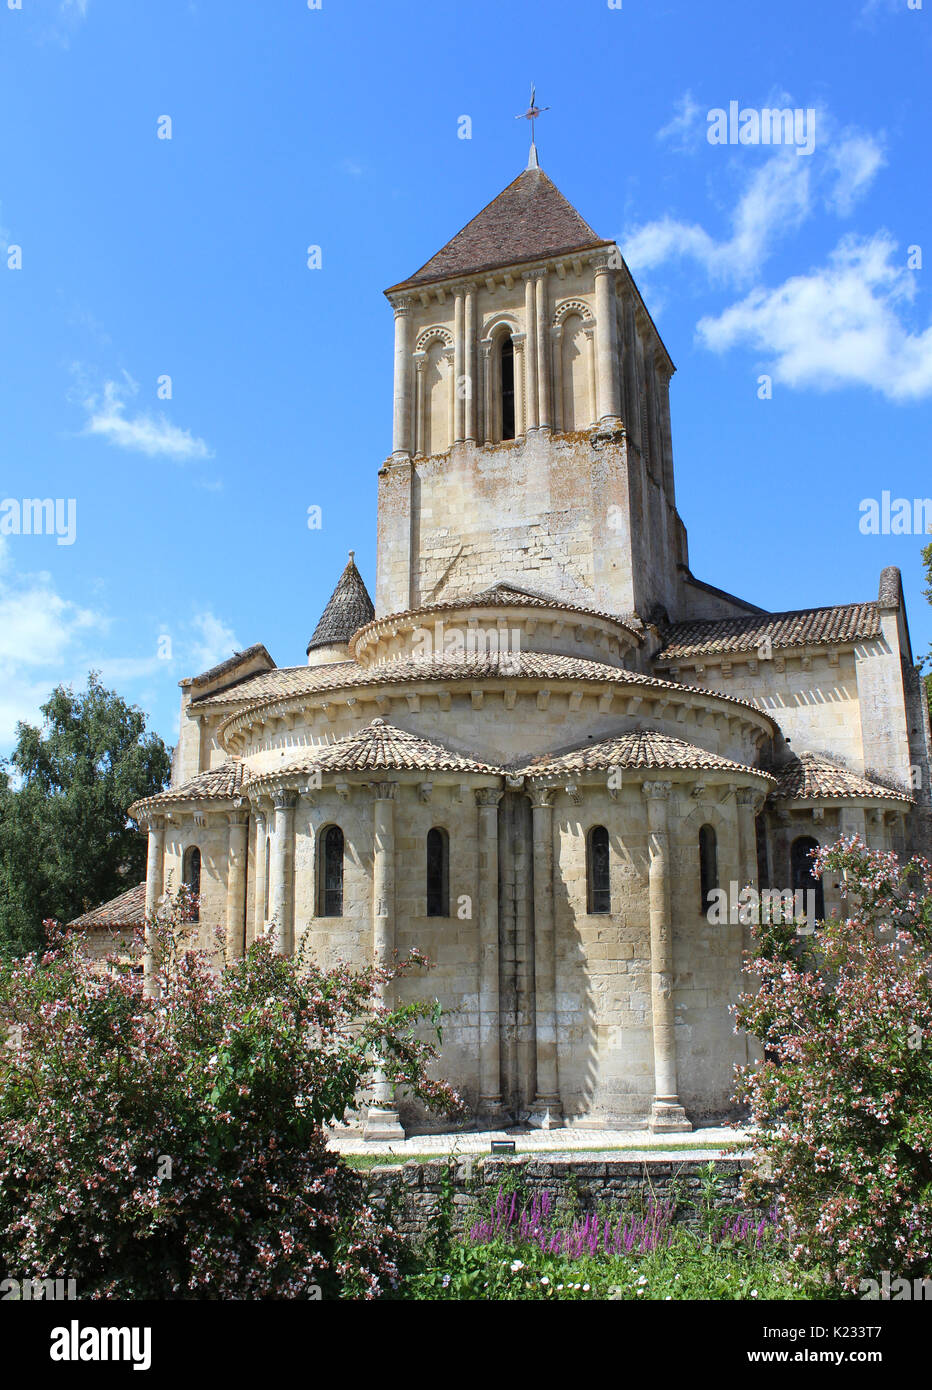 The beautiful 12th century church of St Hilaire in Melle, France. Saint-Hilaire Church is also a UNESCO World Heritage Site since 1998, and a stage of Stock Photo